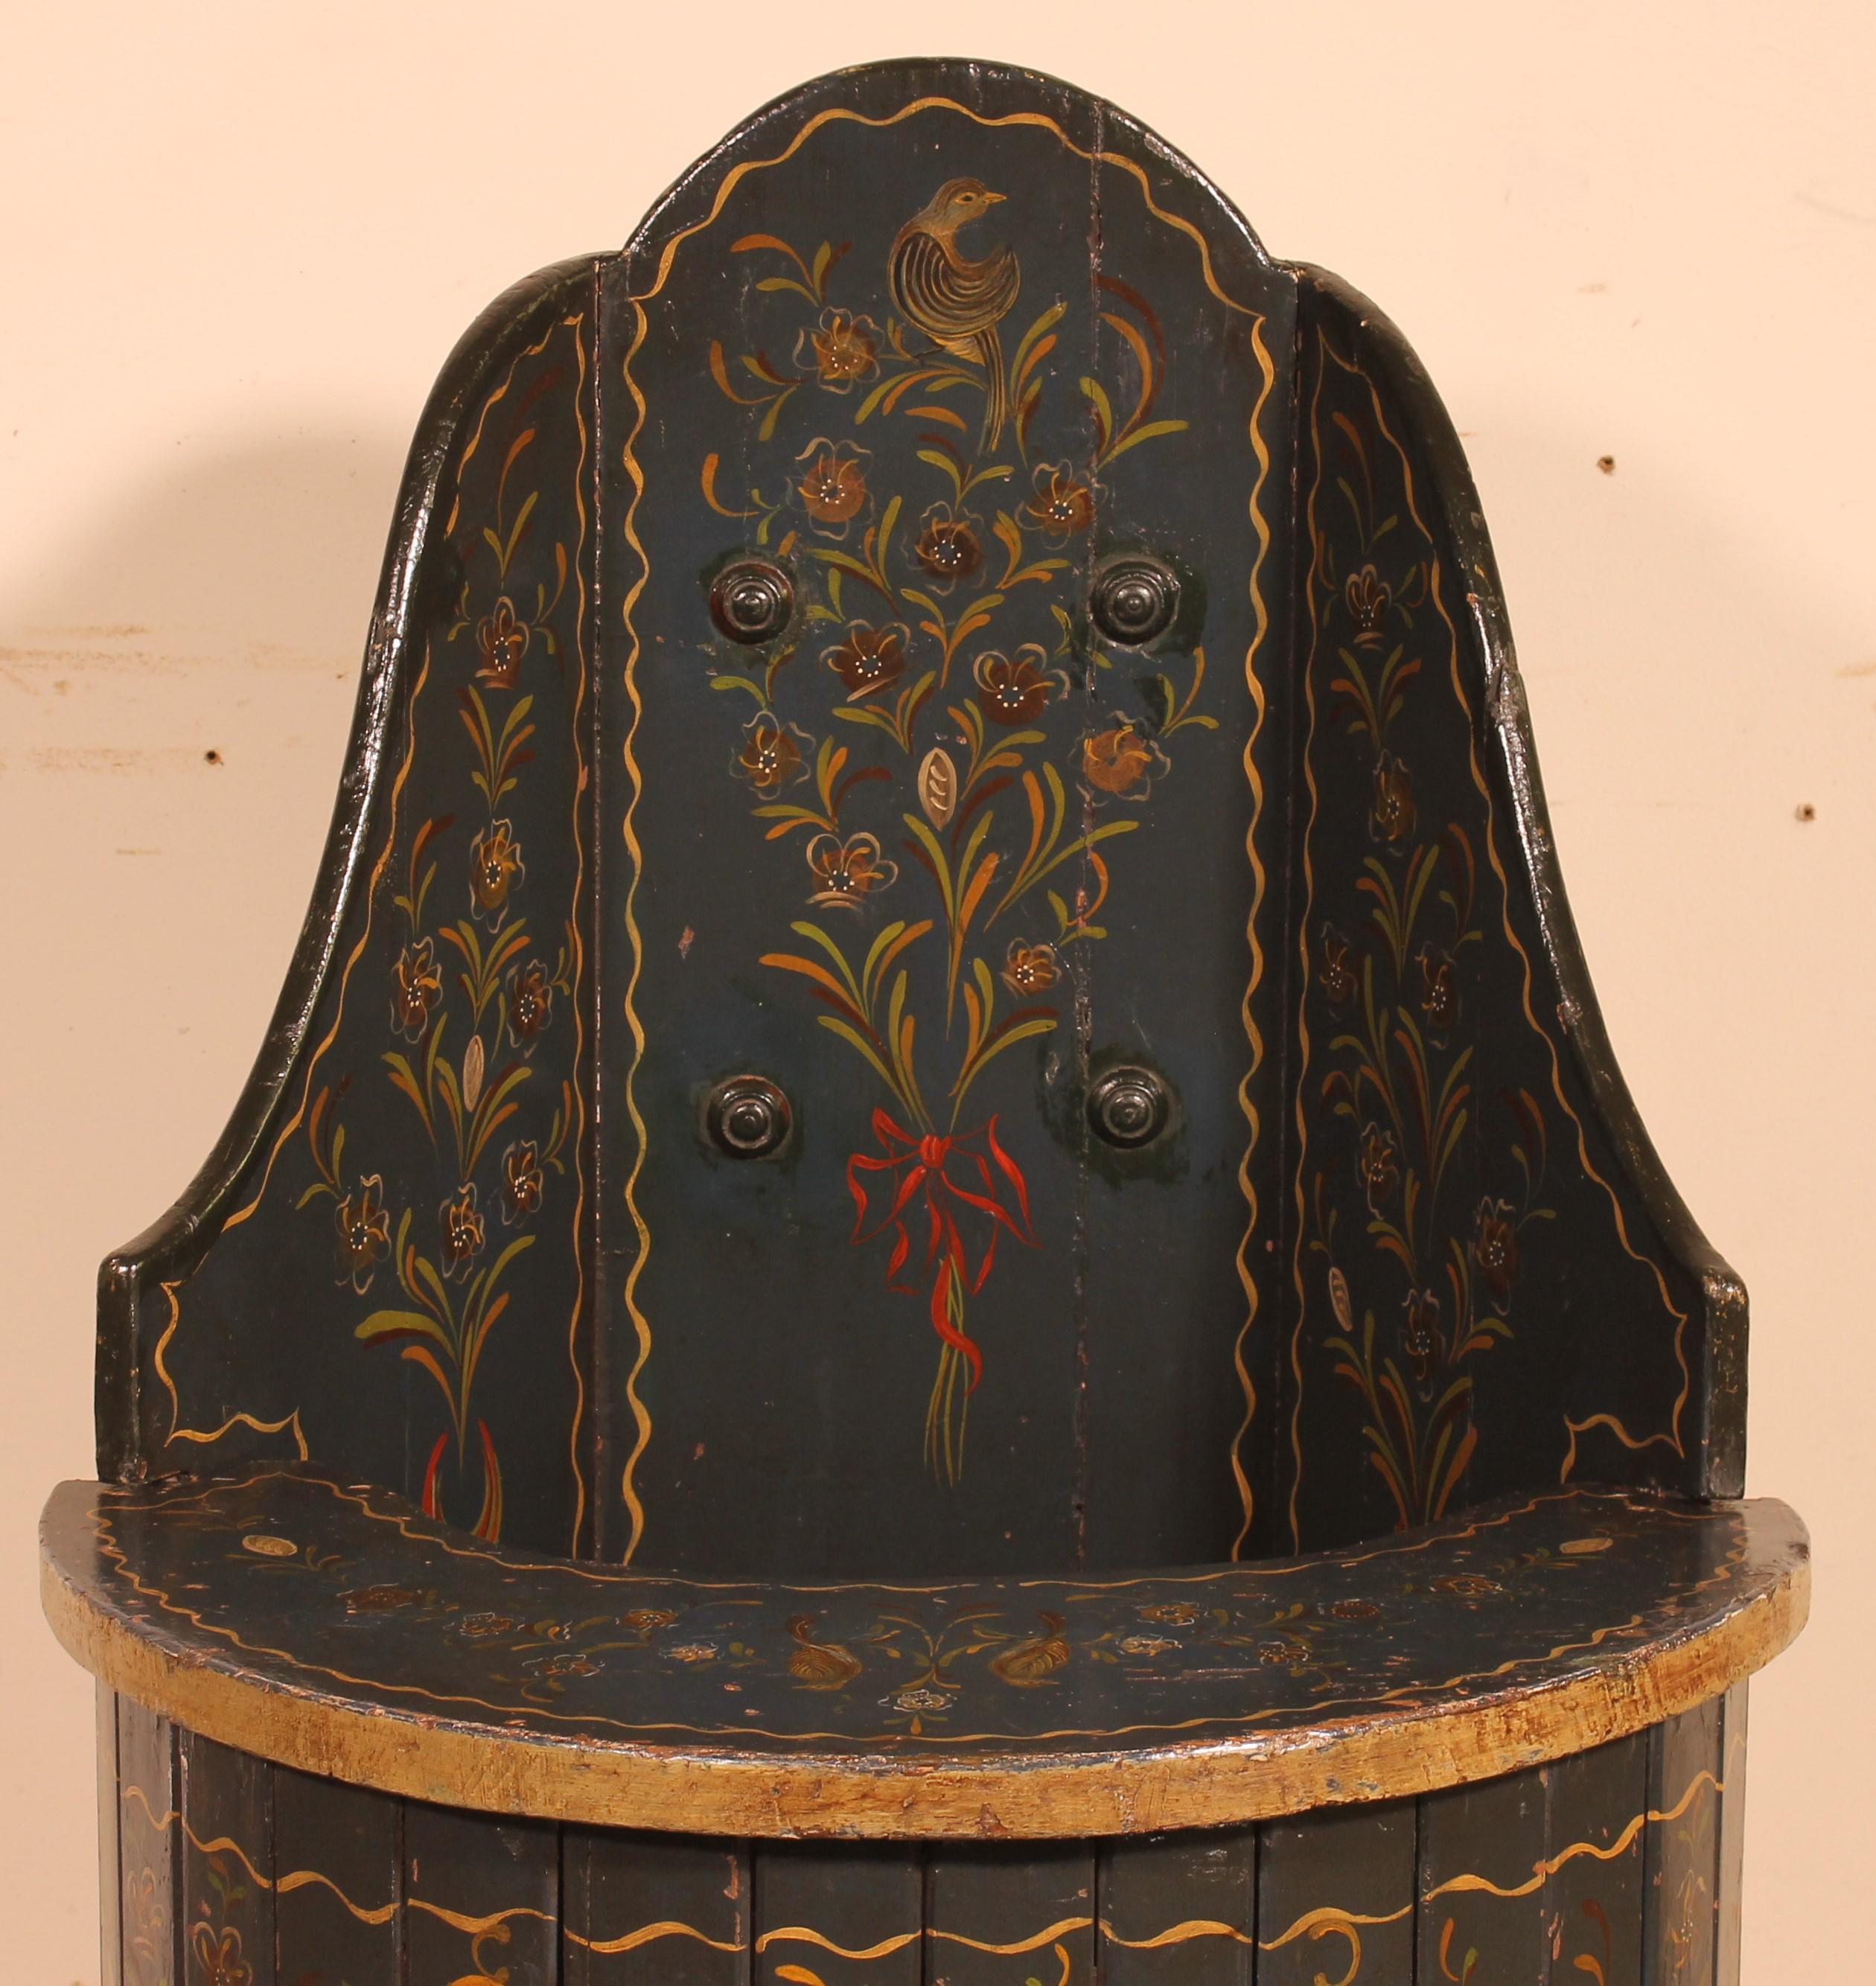 Lovely Austrian child's chair decorated with flowers and birds from the end of the 18th century beginning of the 19th century circa 1800.

Very beautiful original polychromy.
The lower part has a small door and the table top can be